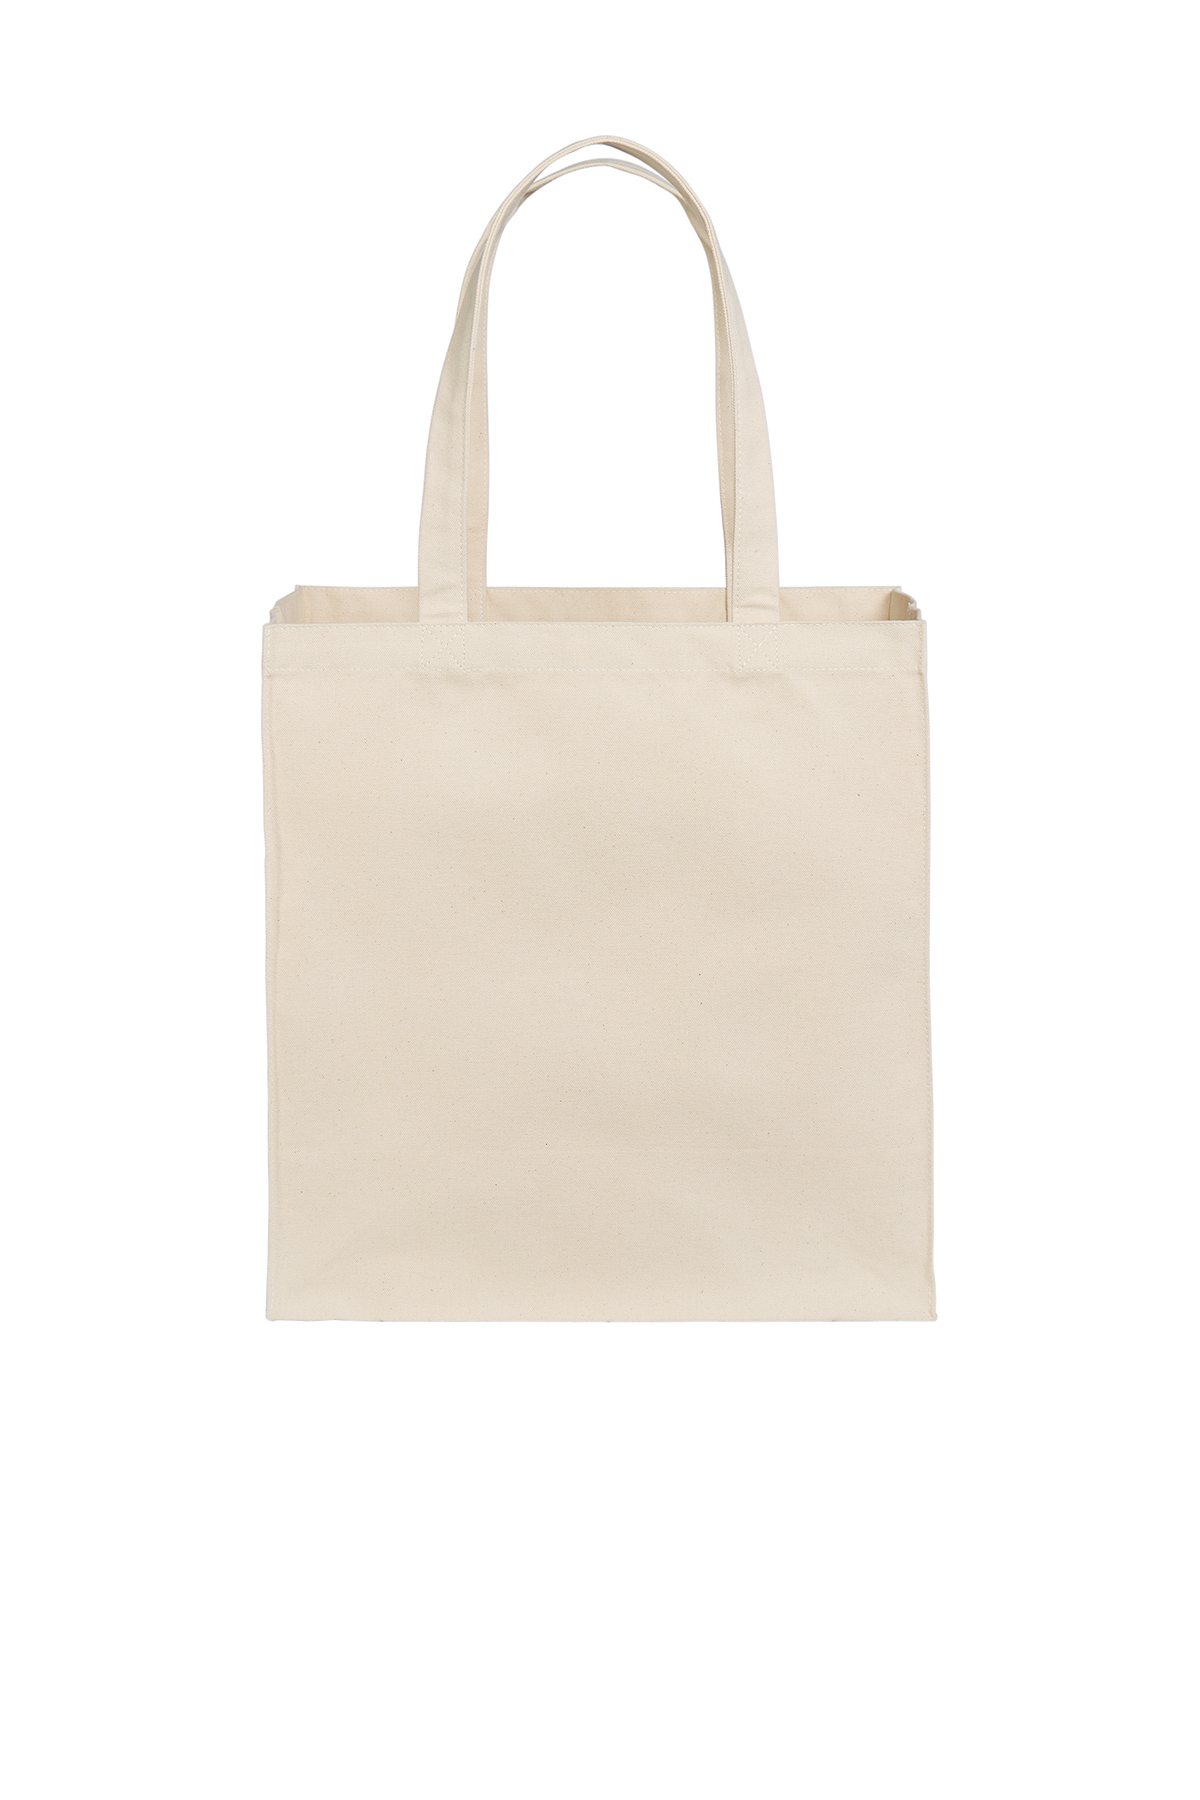 SHOPPING BAG COTTON | PRINT SCREEN PRINTING ON 1 FACE 2 COLORS